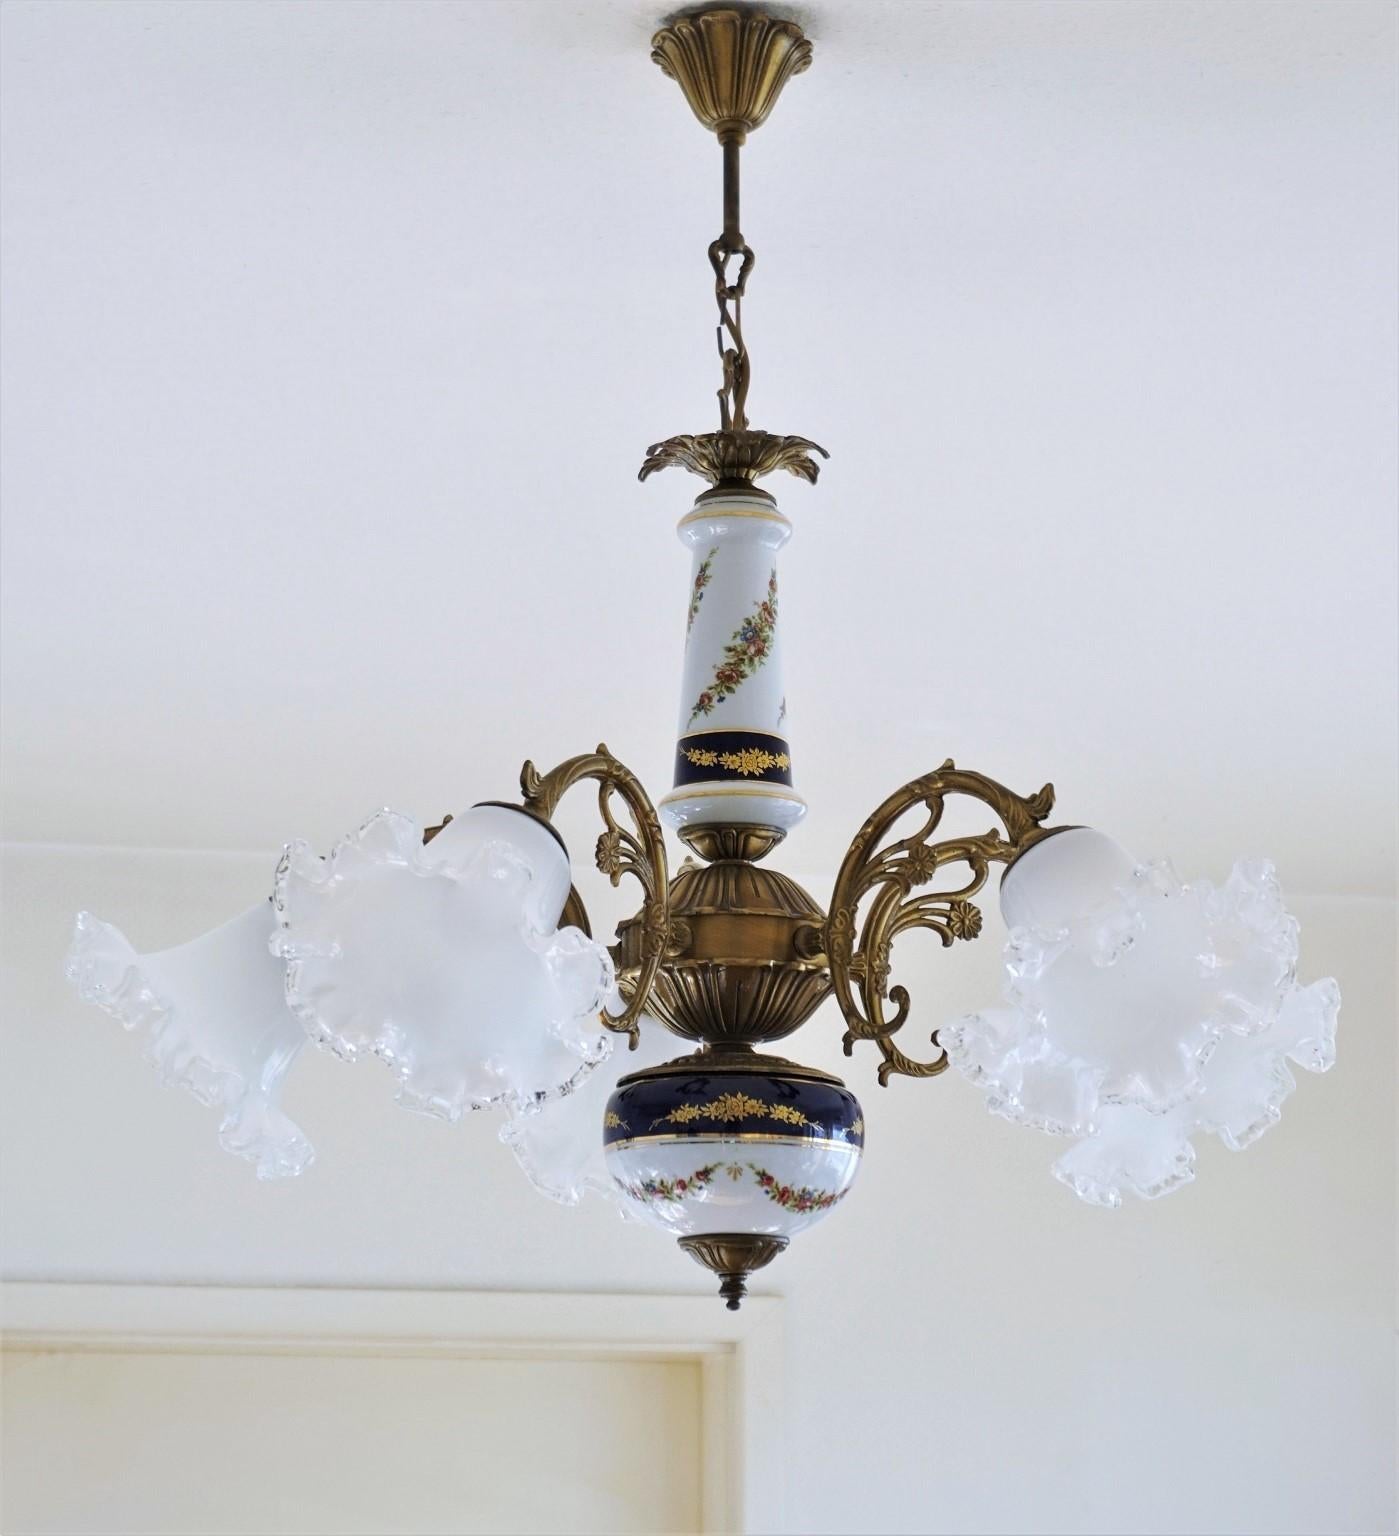 Vintage Limoges porcelain and burnished brass chandelier, five-arm with Murano glass shades, France, 1950s. White and cobalt blue hand painted porcelain with floral motifs and gilded decor.
Very good condition: Rewired, on porcelain and glass no